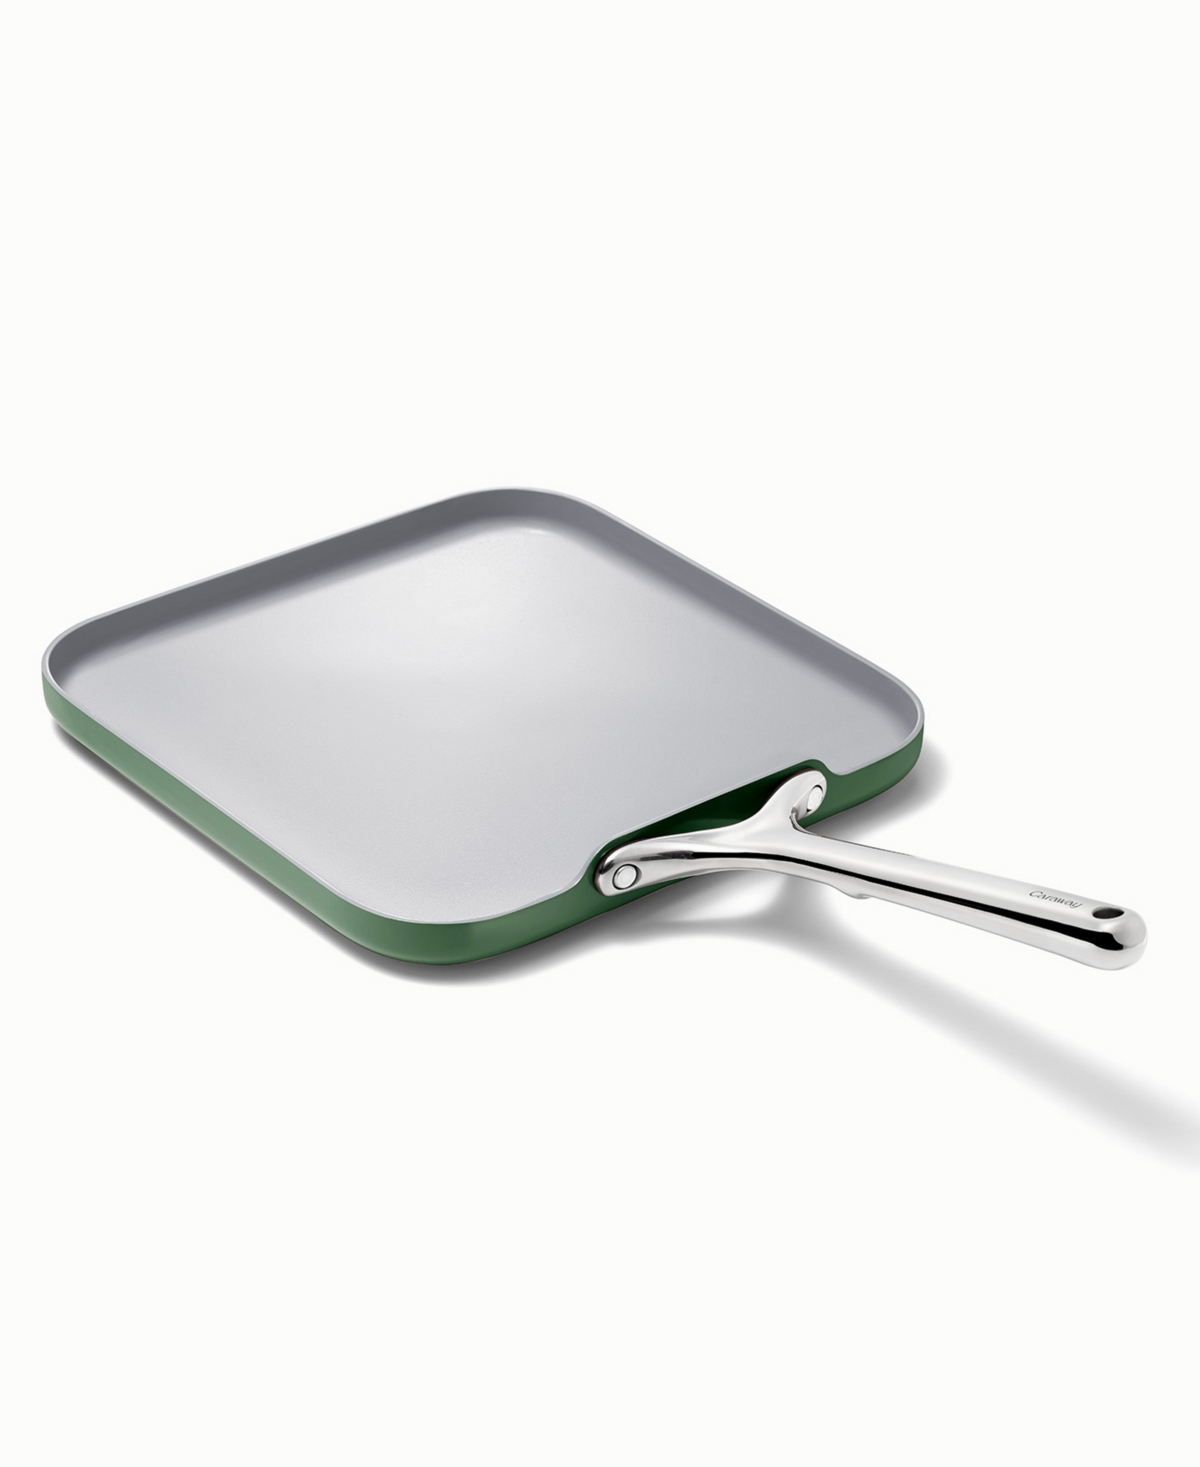 Caraway Non-stick Ceramic-coated 11" Square Griddle Pan In Sage